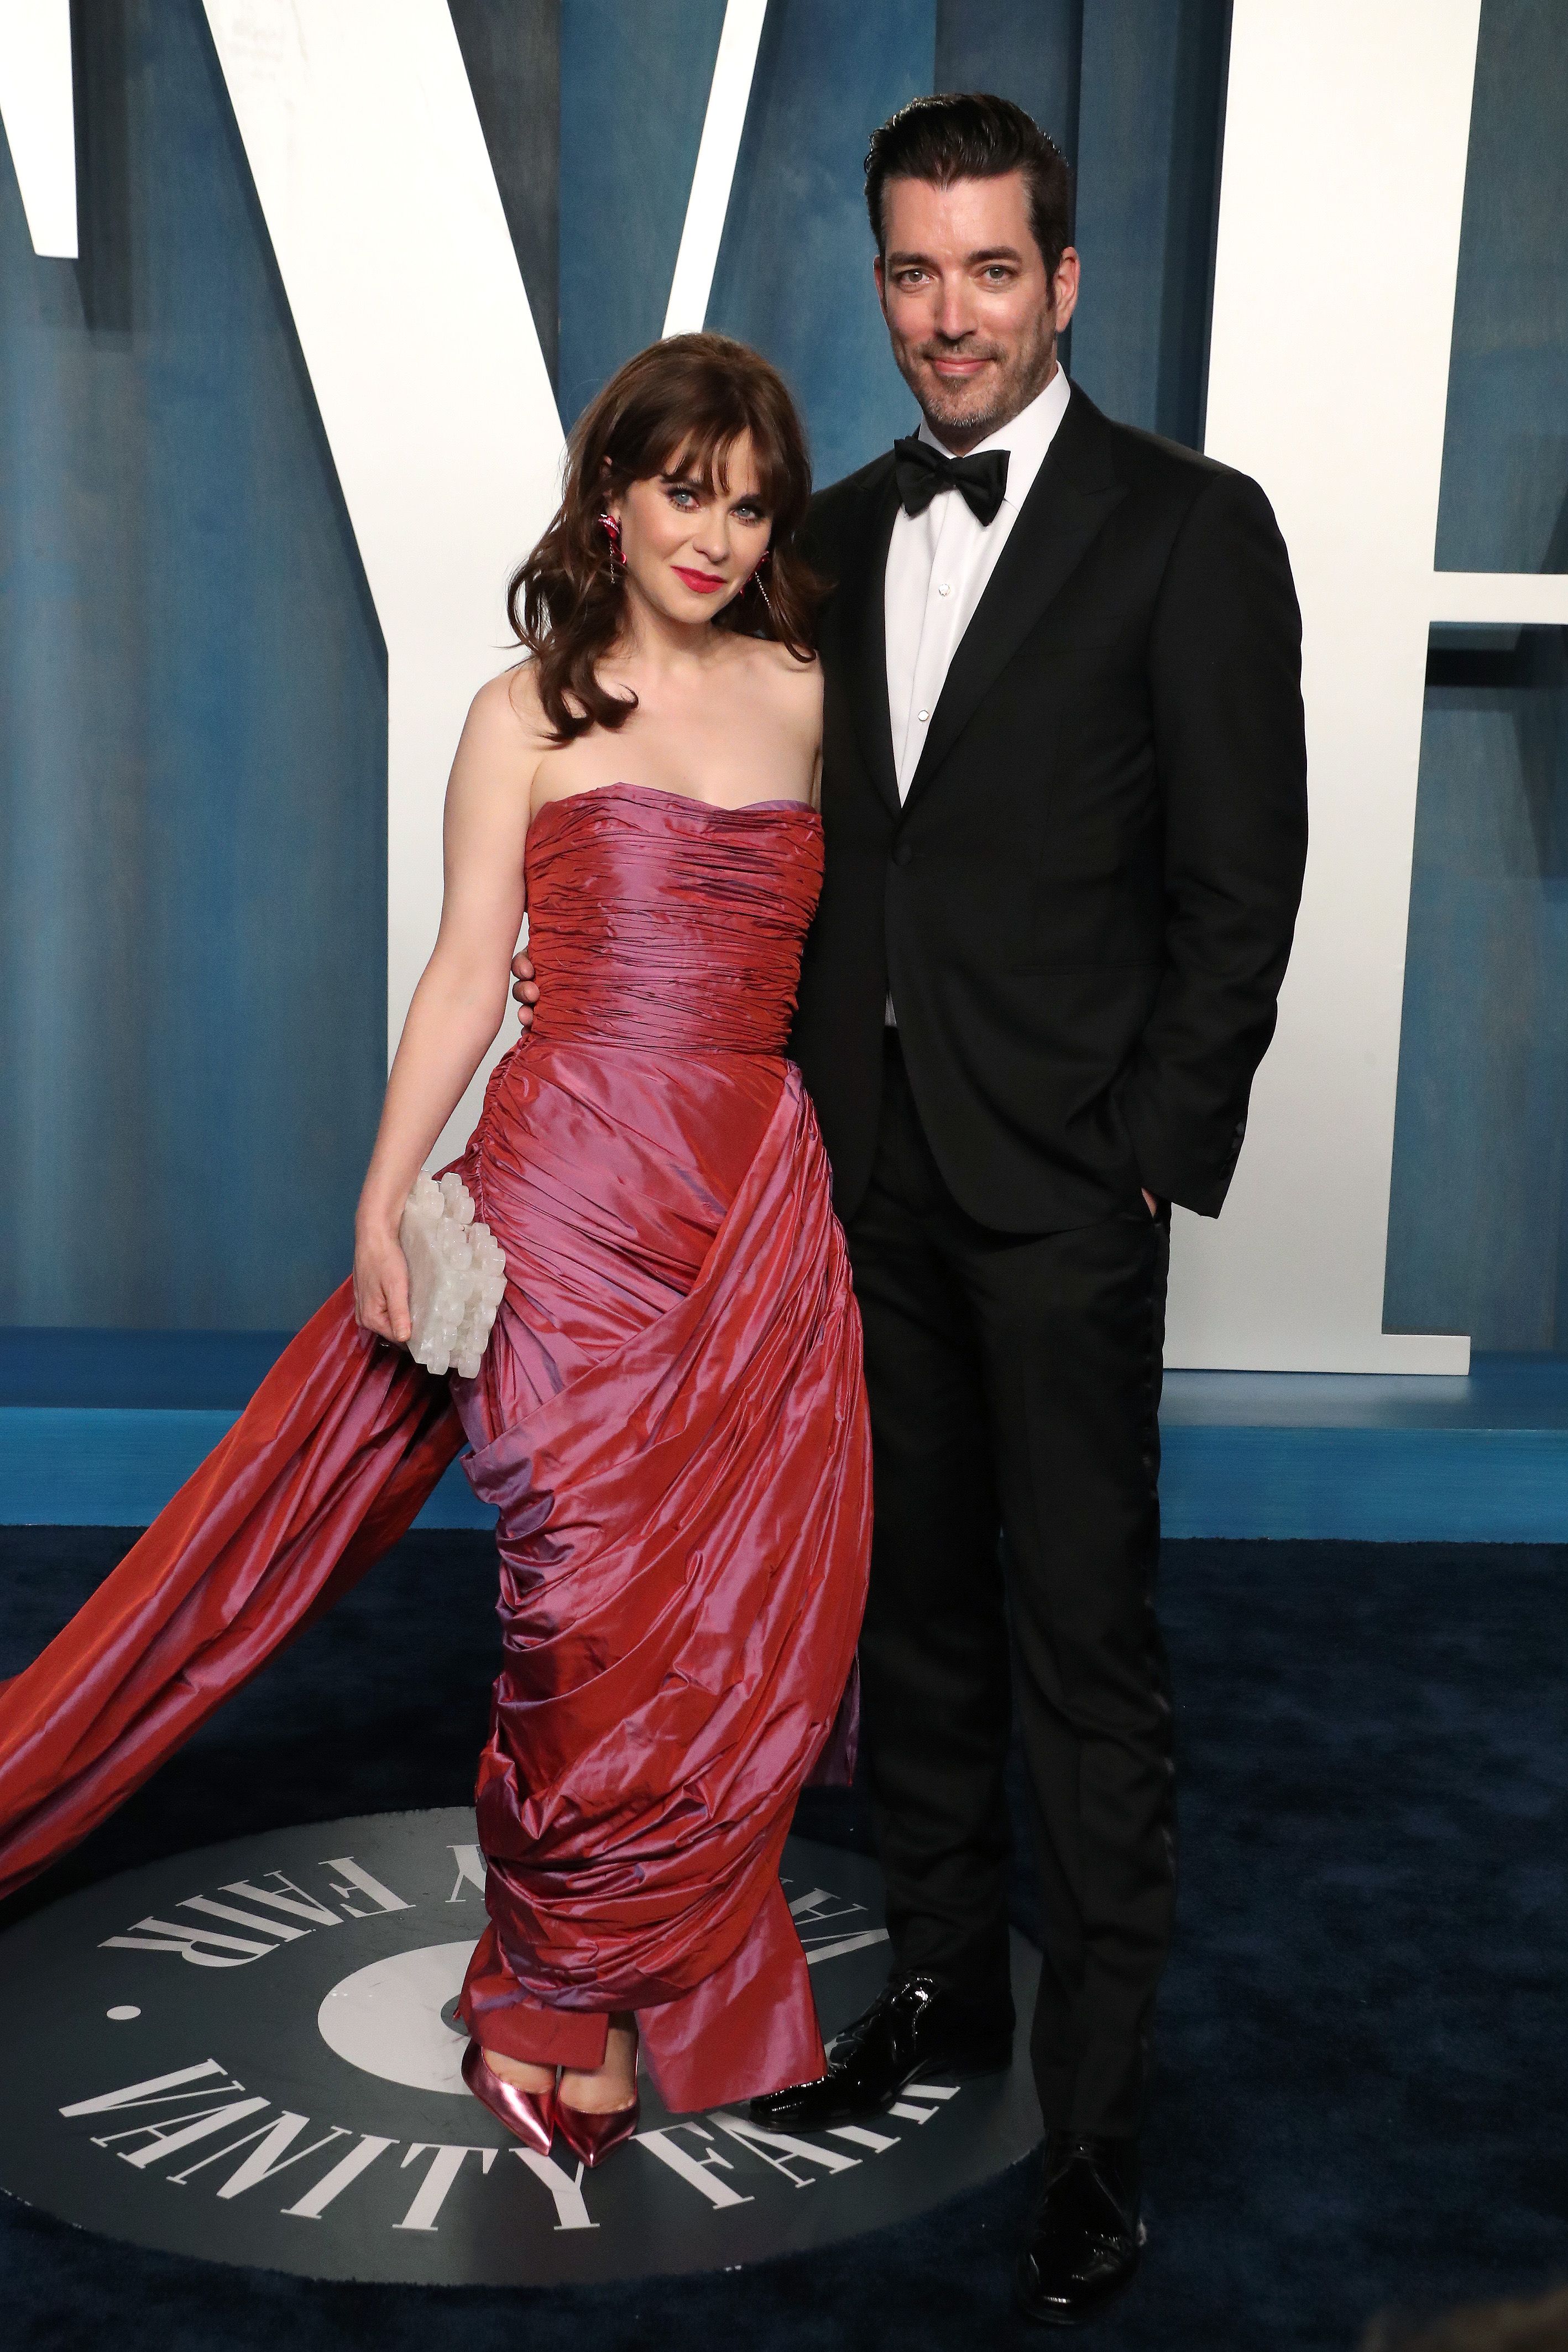 Are Jonathan Scott and Zooey Deschanel Still Together?